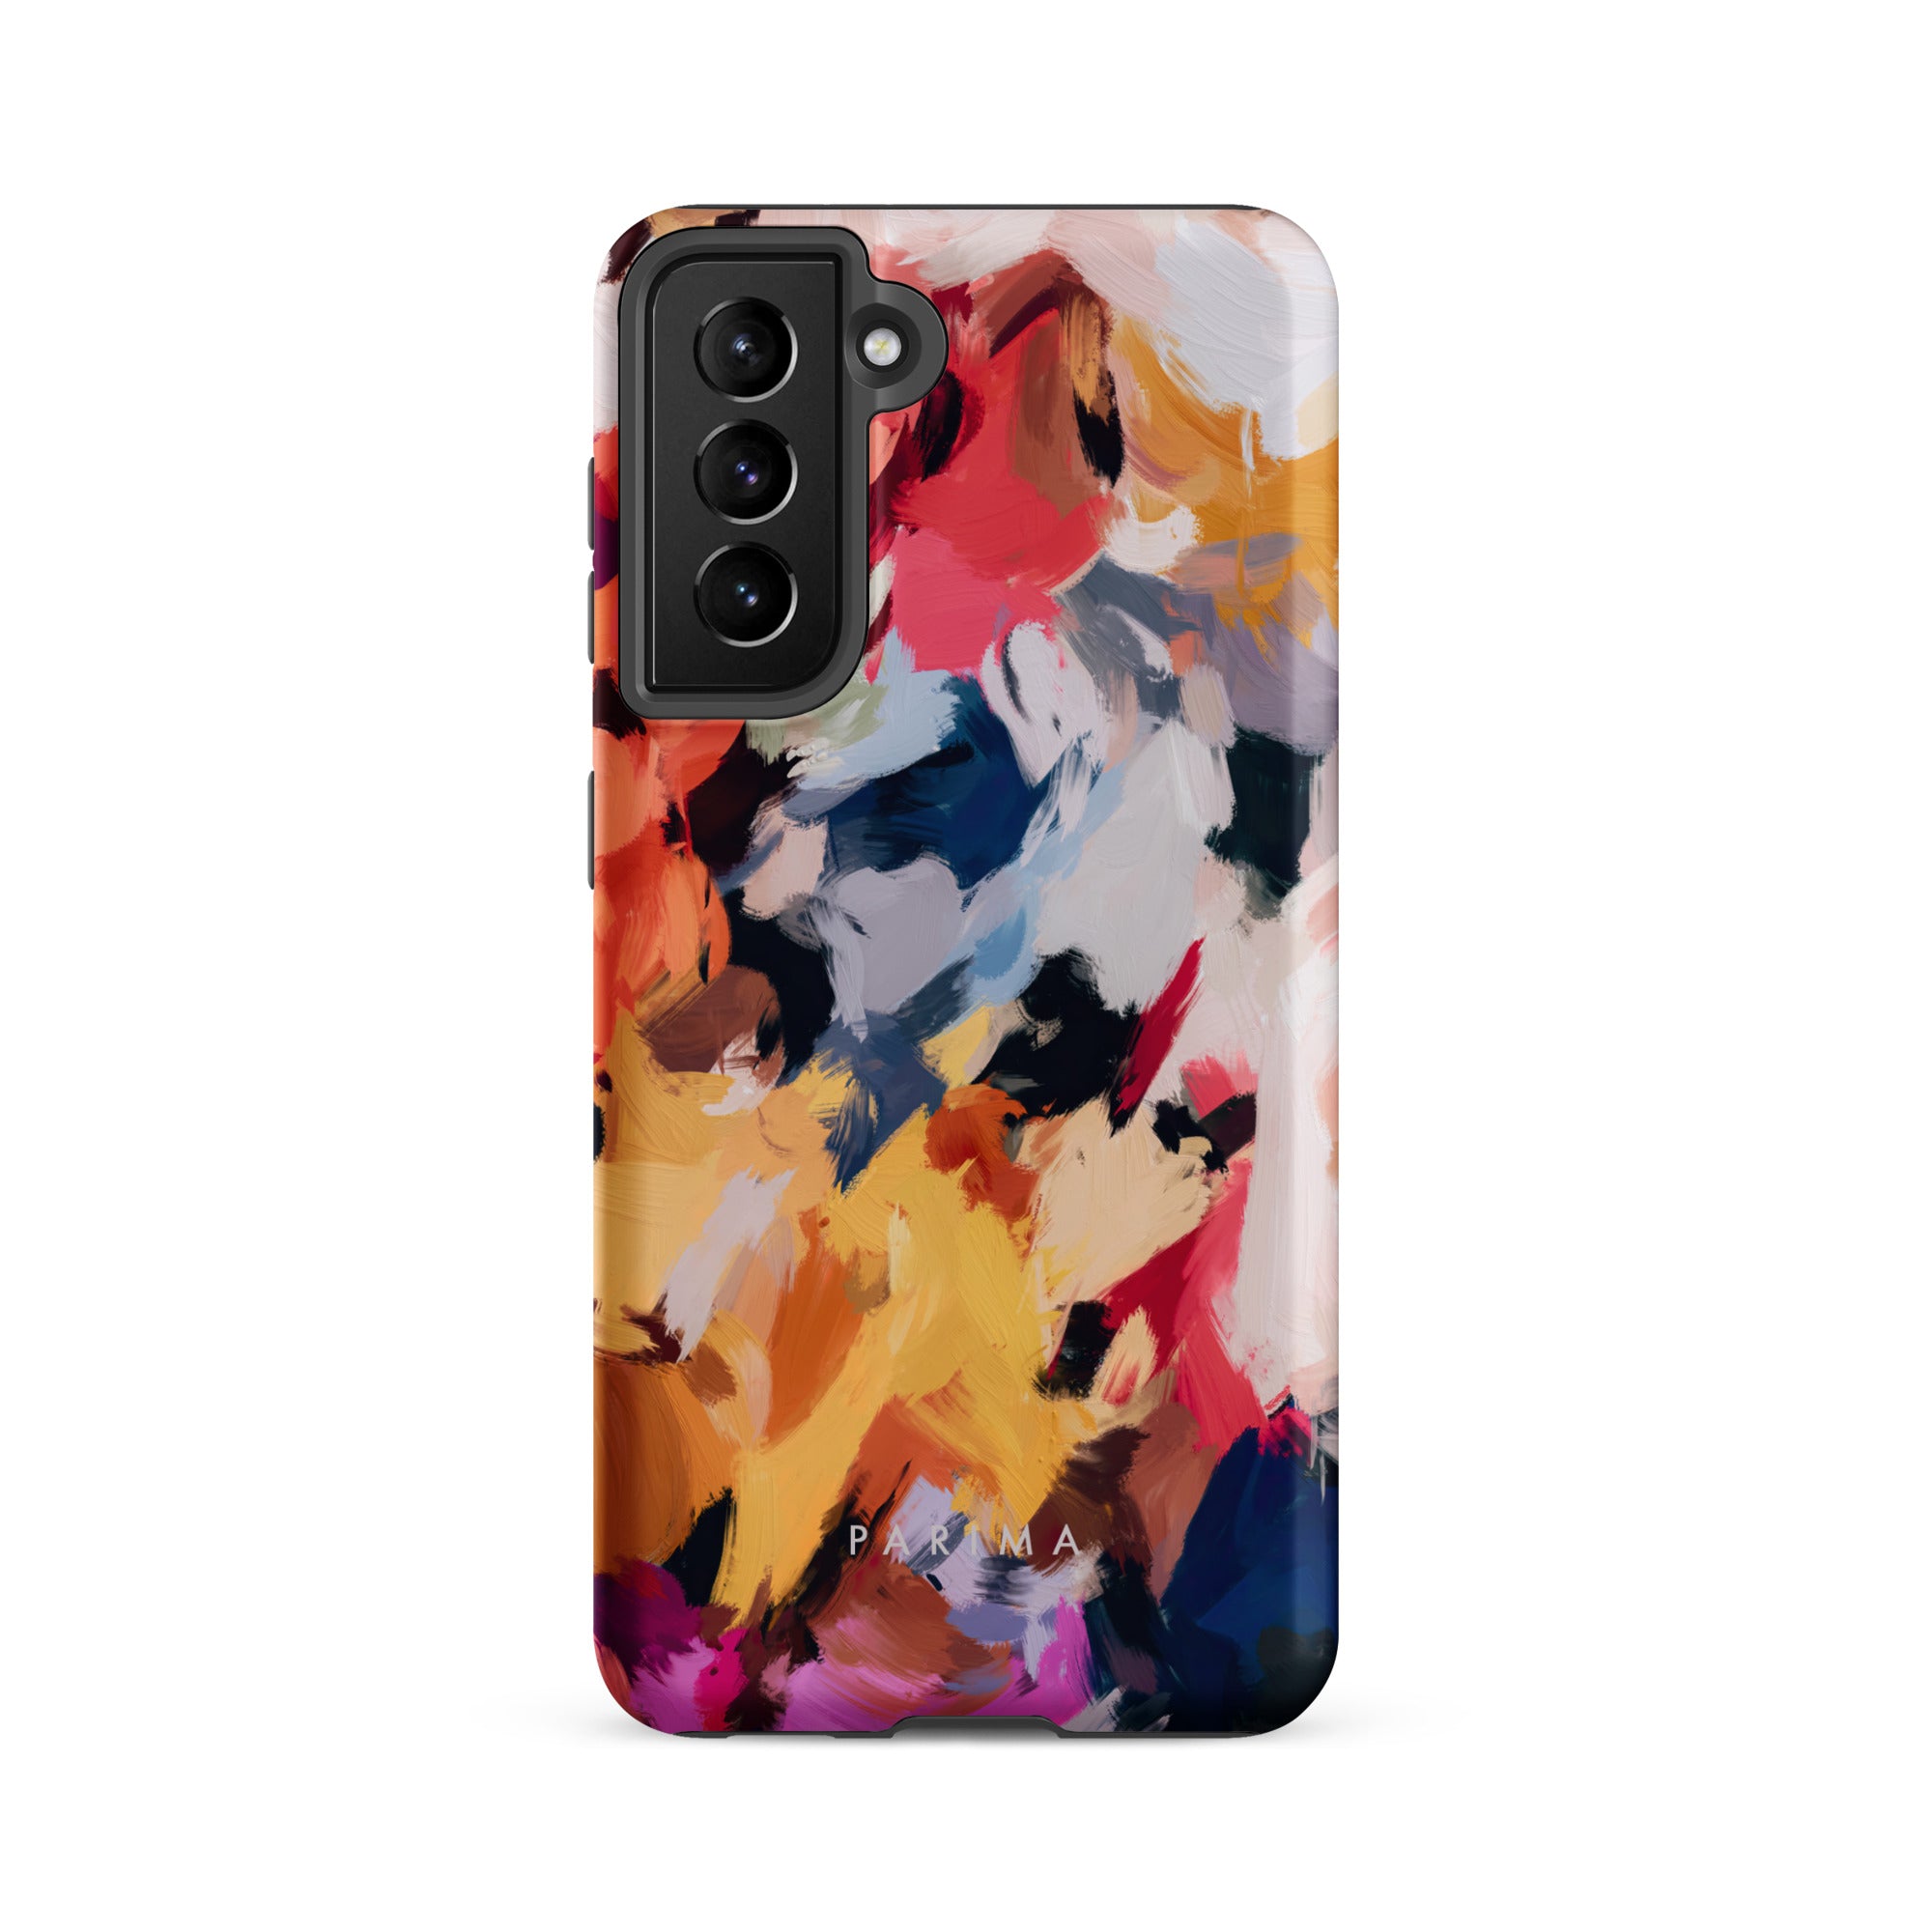 Wilde, blue and yellow multicolor abstract art on Samsung Galaxy S21 FE tough case by Parima Studio